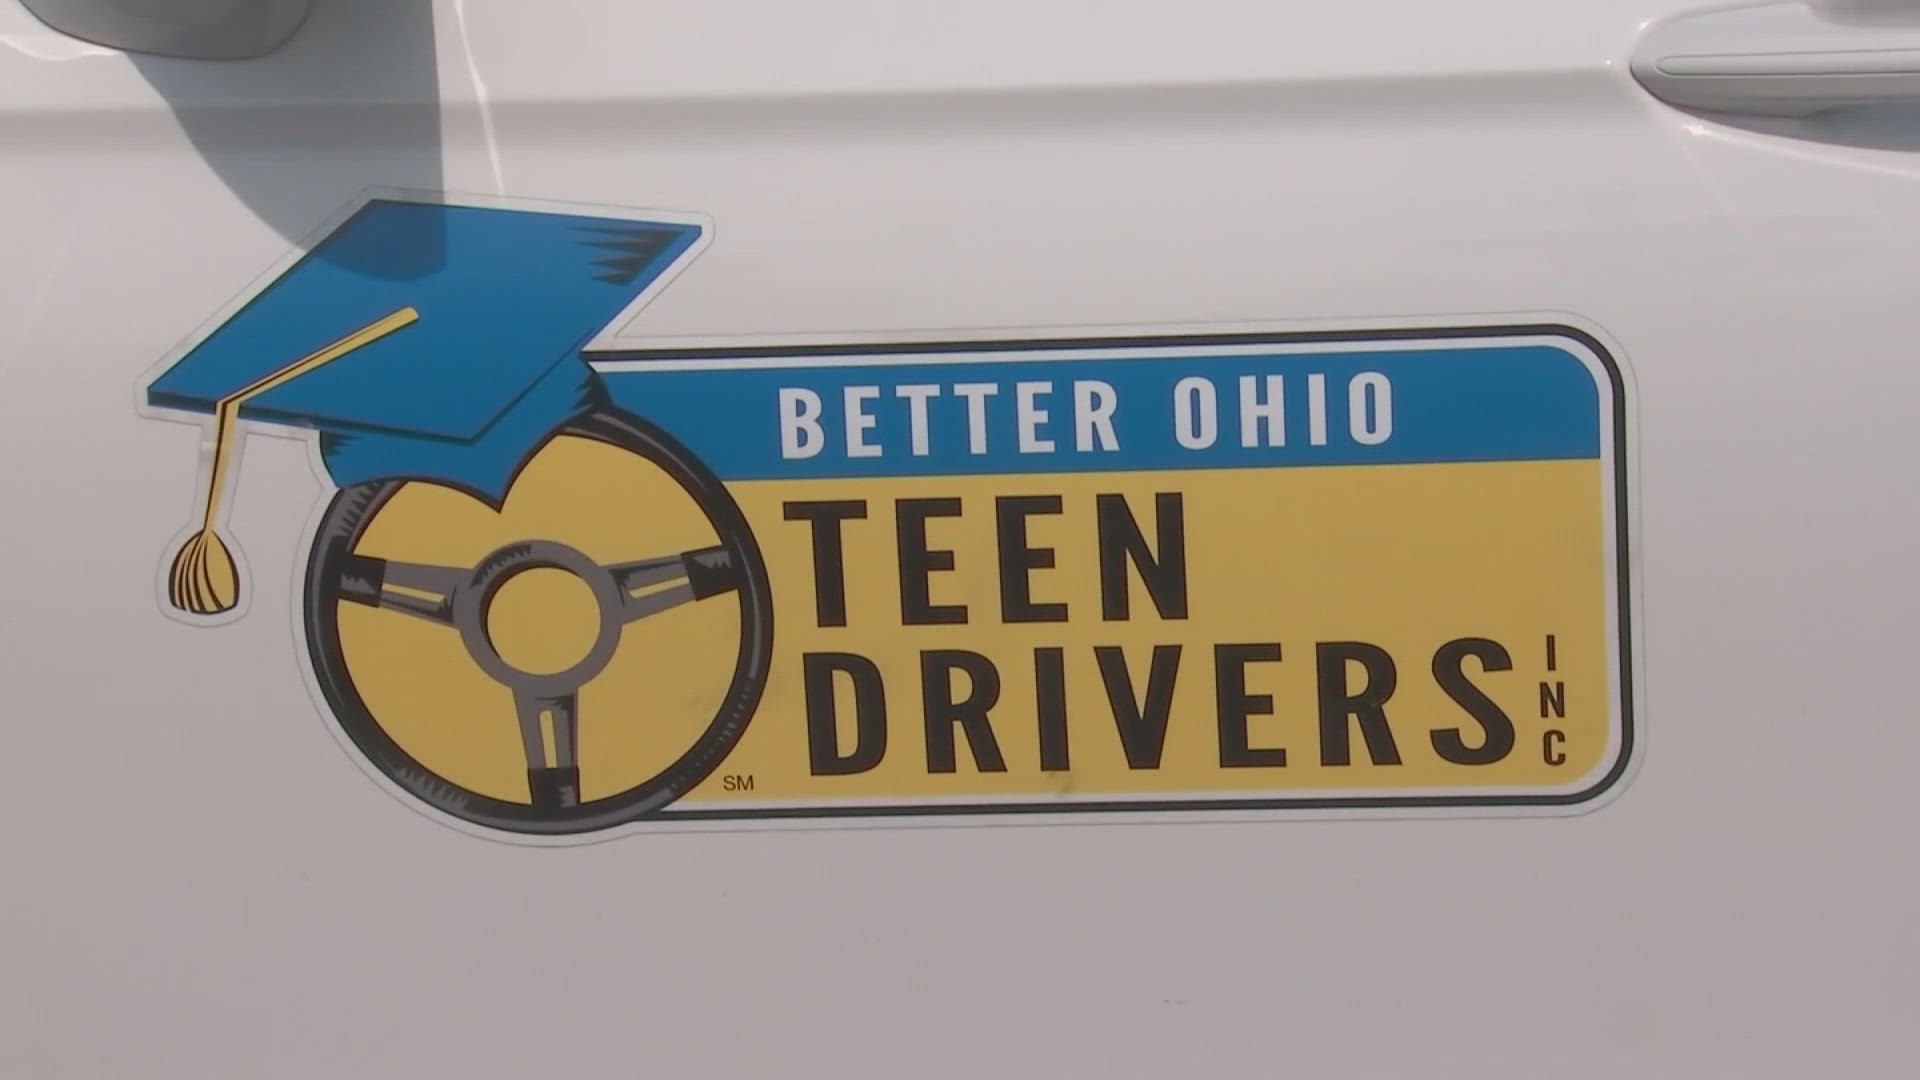 10TV and the Tegna Foundation are proud to present Better Ohio Teen Drivers with a grant for work within the community and for its support of Maria’s Message.